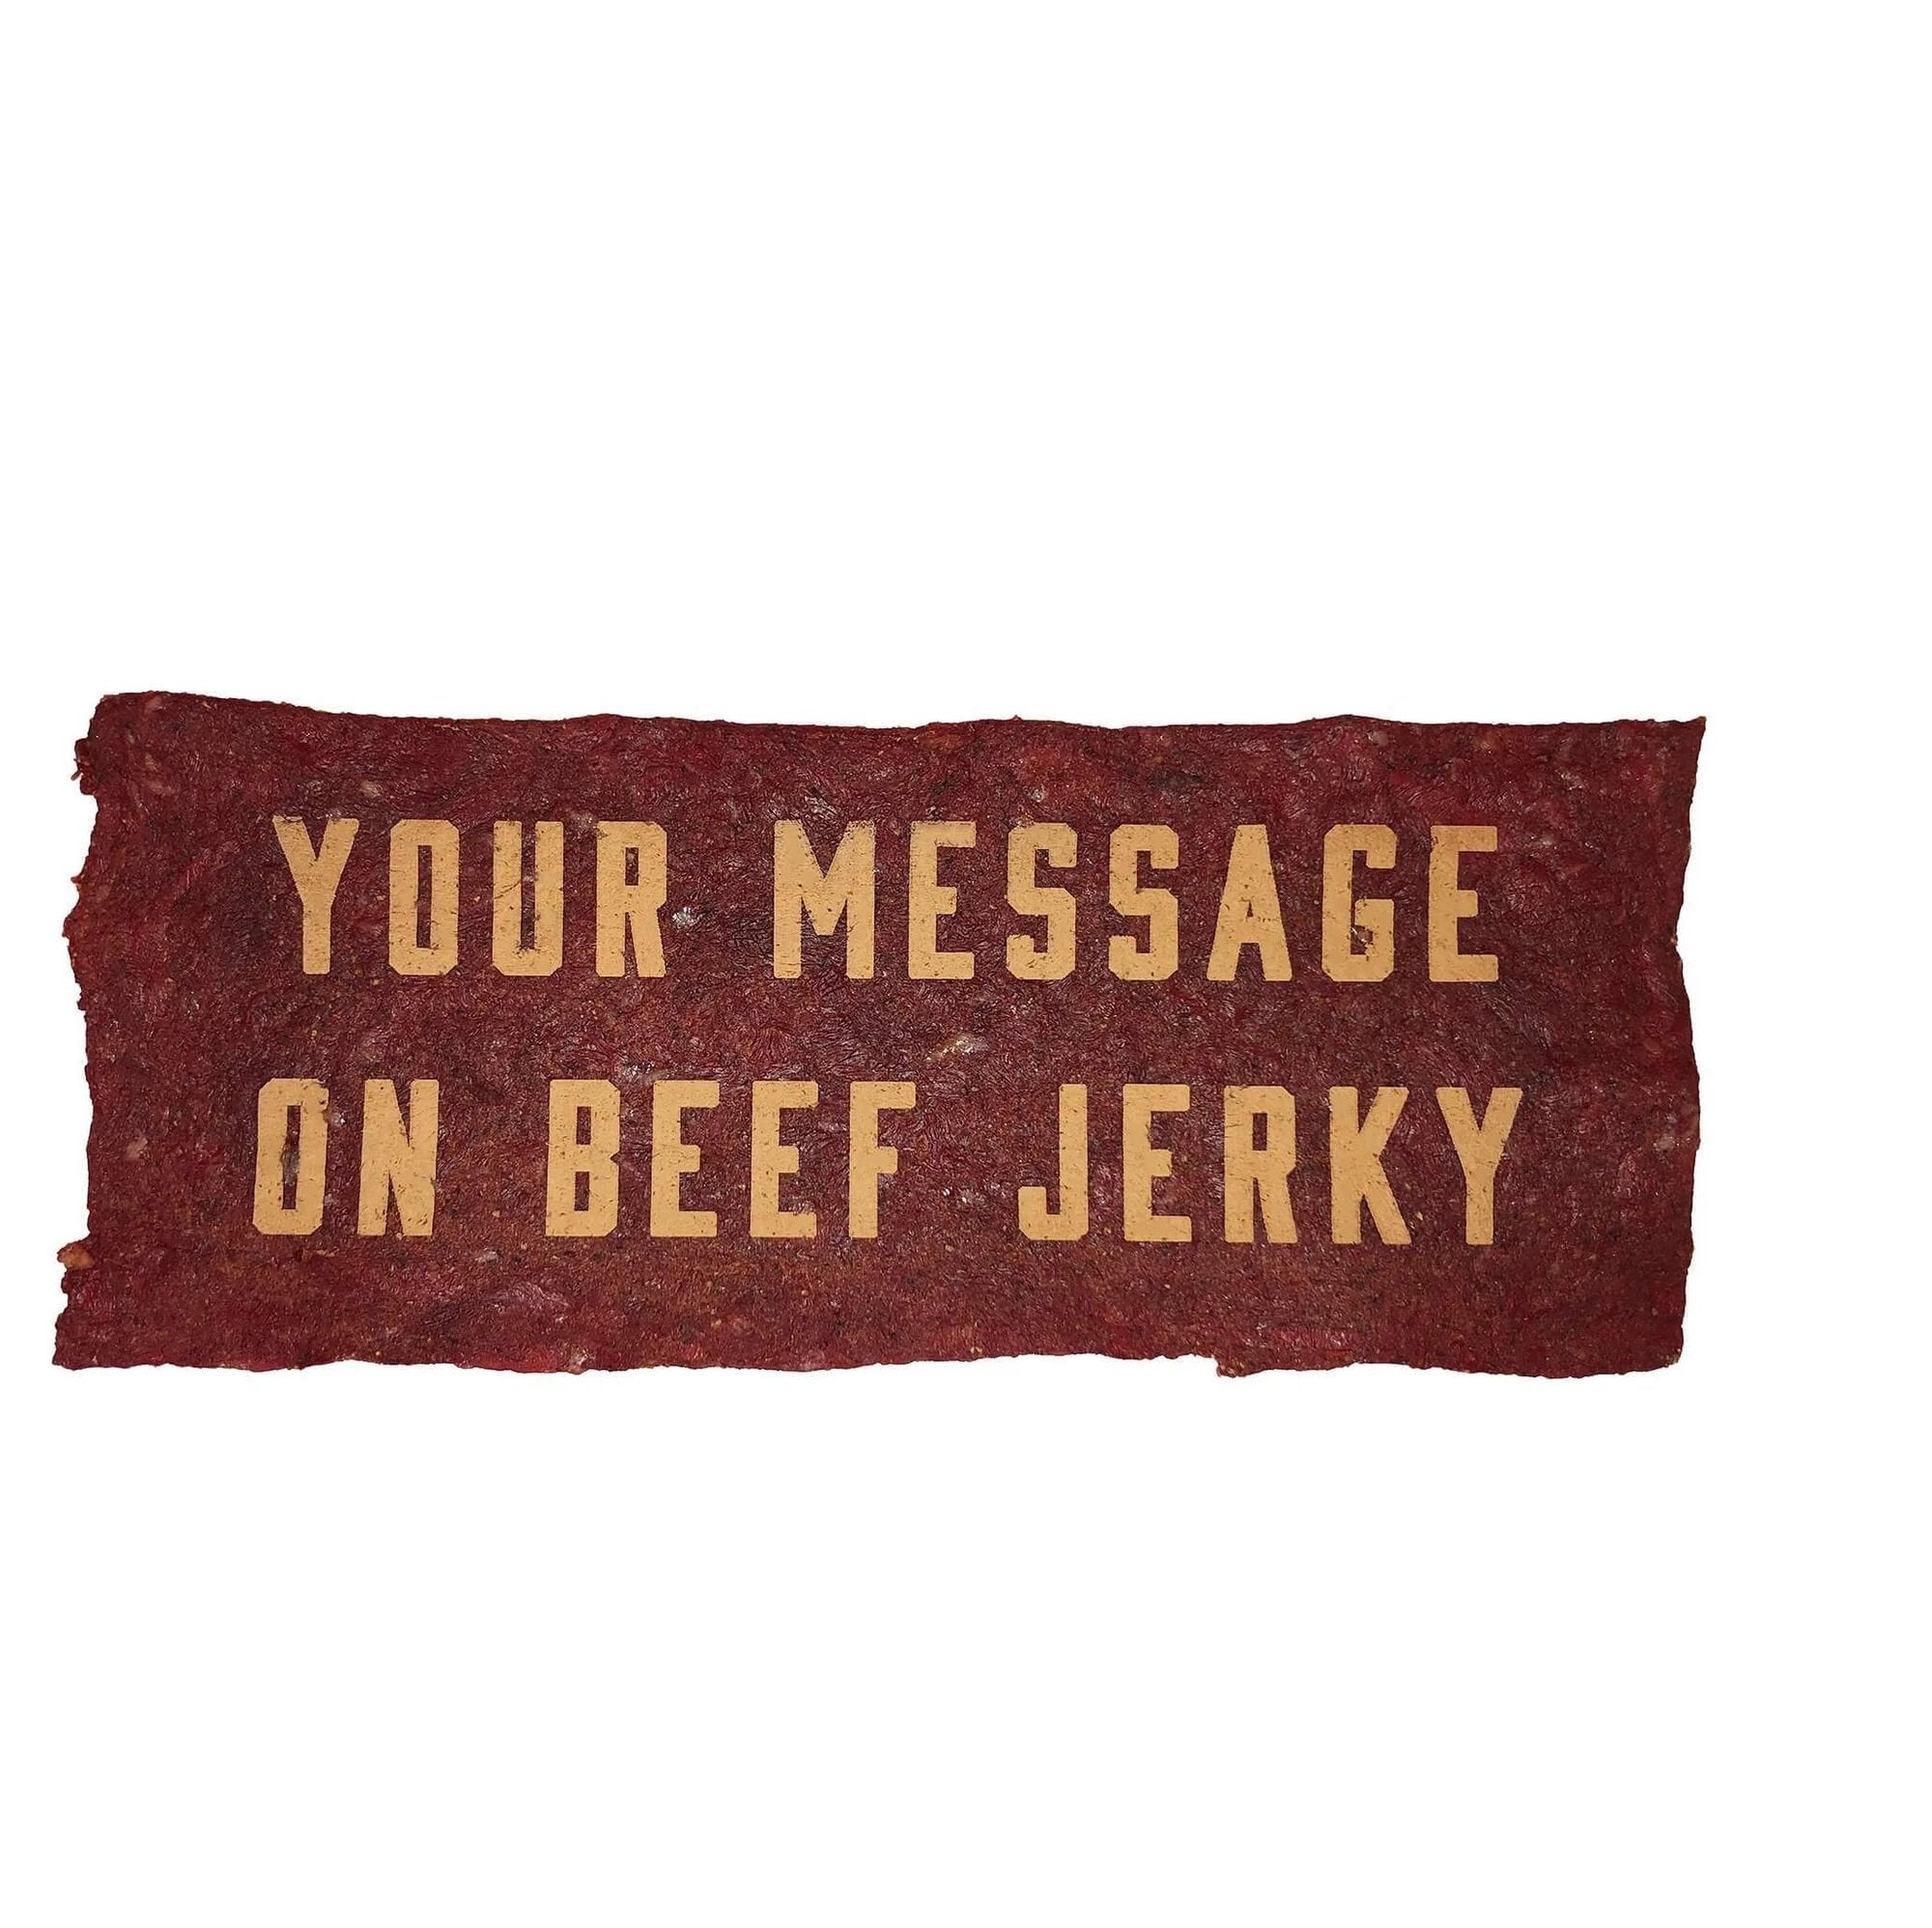 100% edible, 100% awesome Meat Card™.